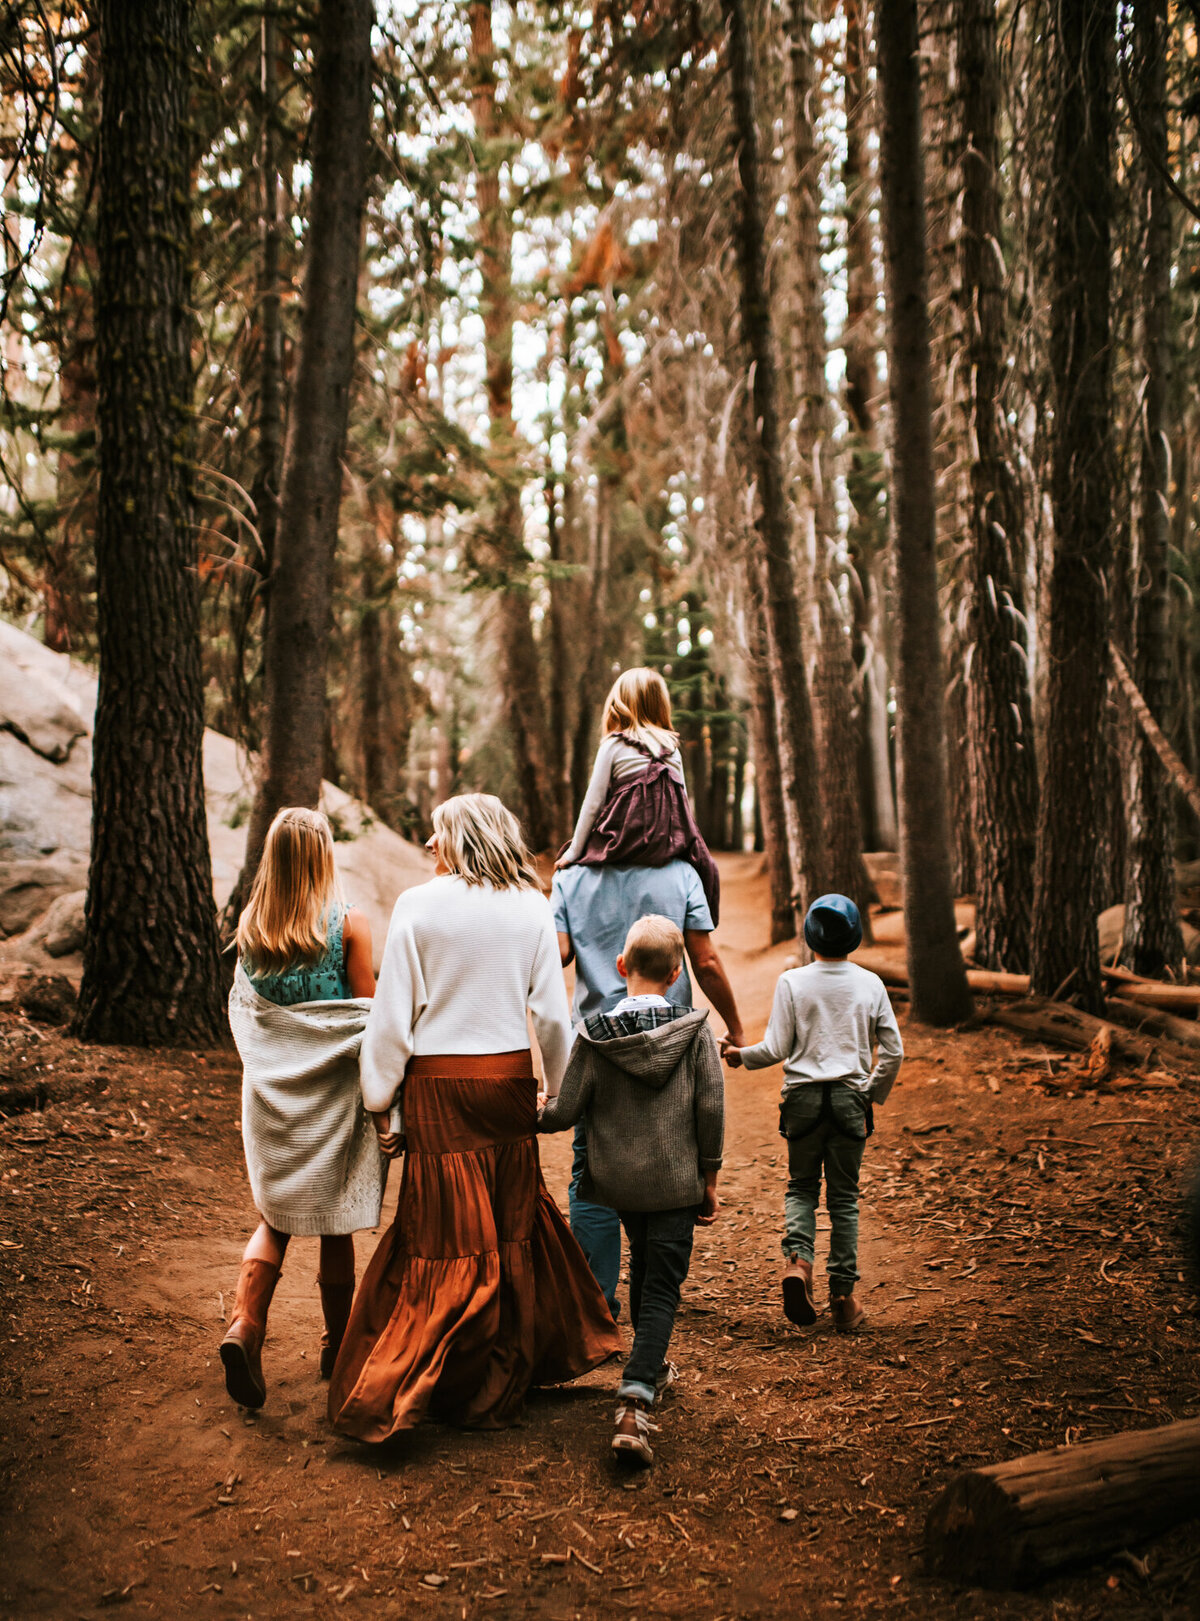 Family walking and holding hands in the forest.